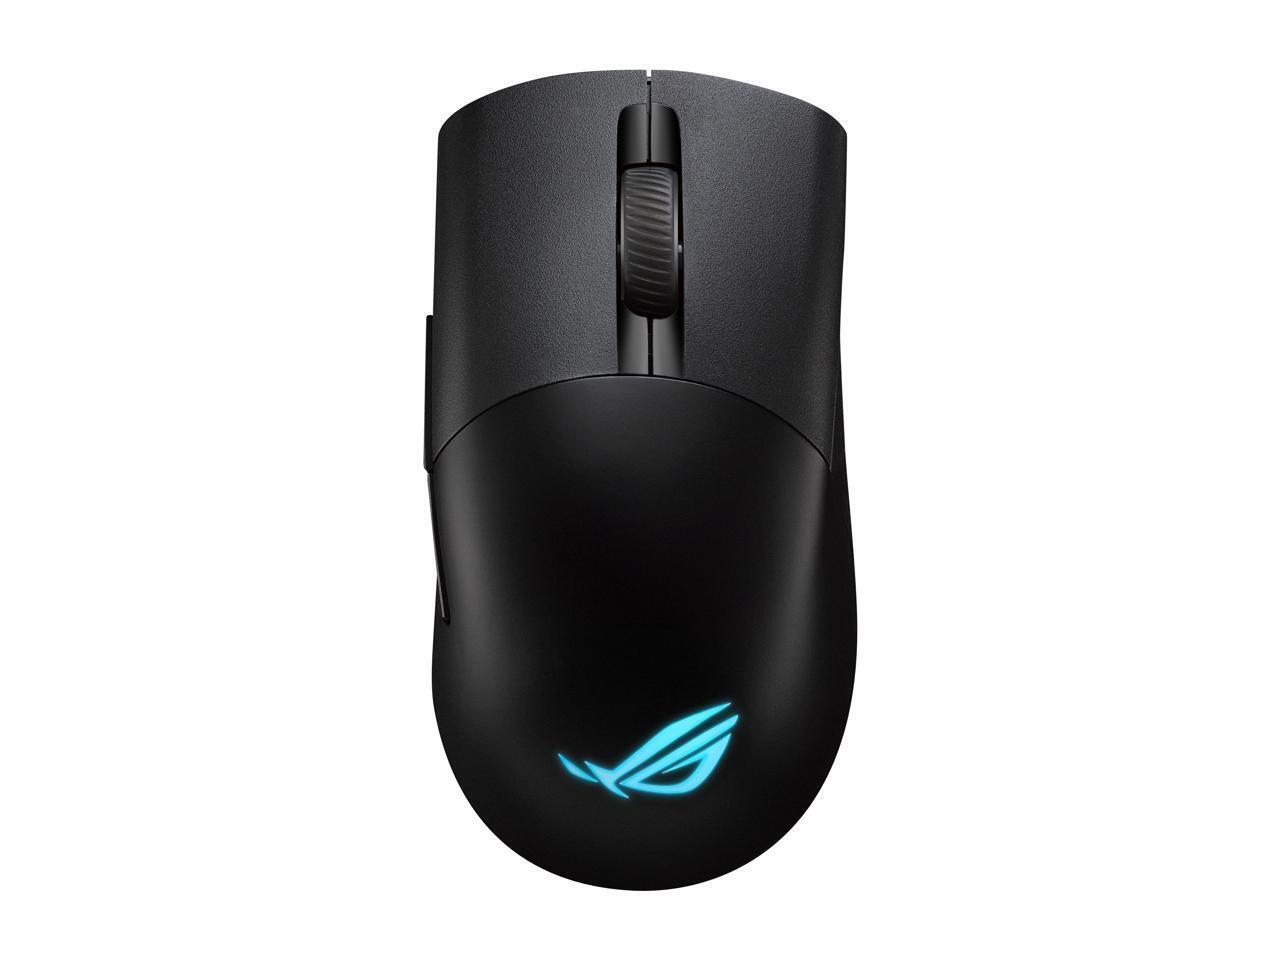 Asus ROG Keris Wireless AimPoint Gaming Mouse, Tri-mode connectivity (2.4GHz RF,